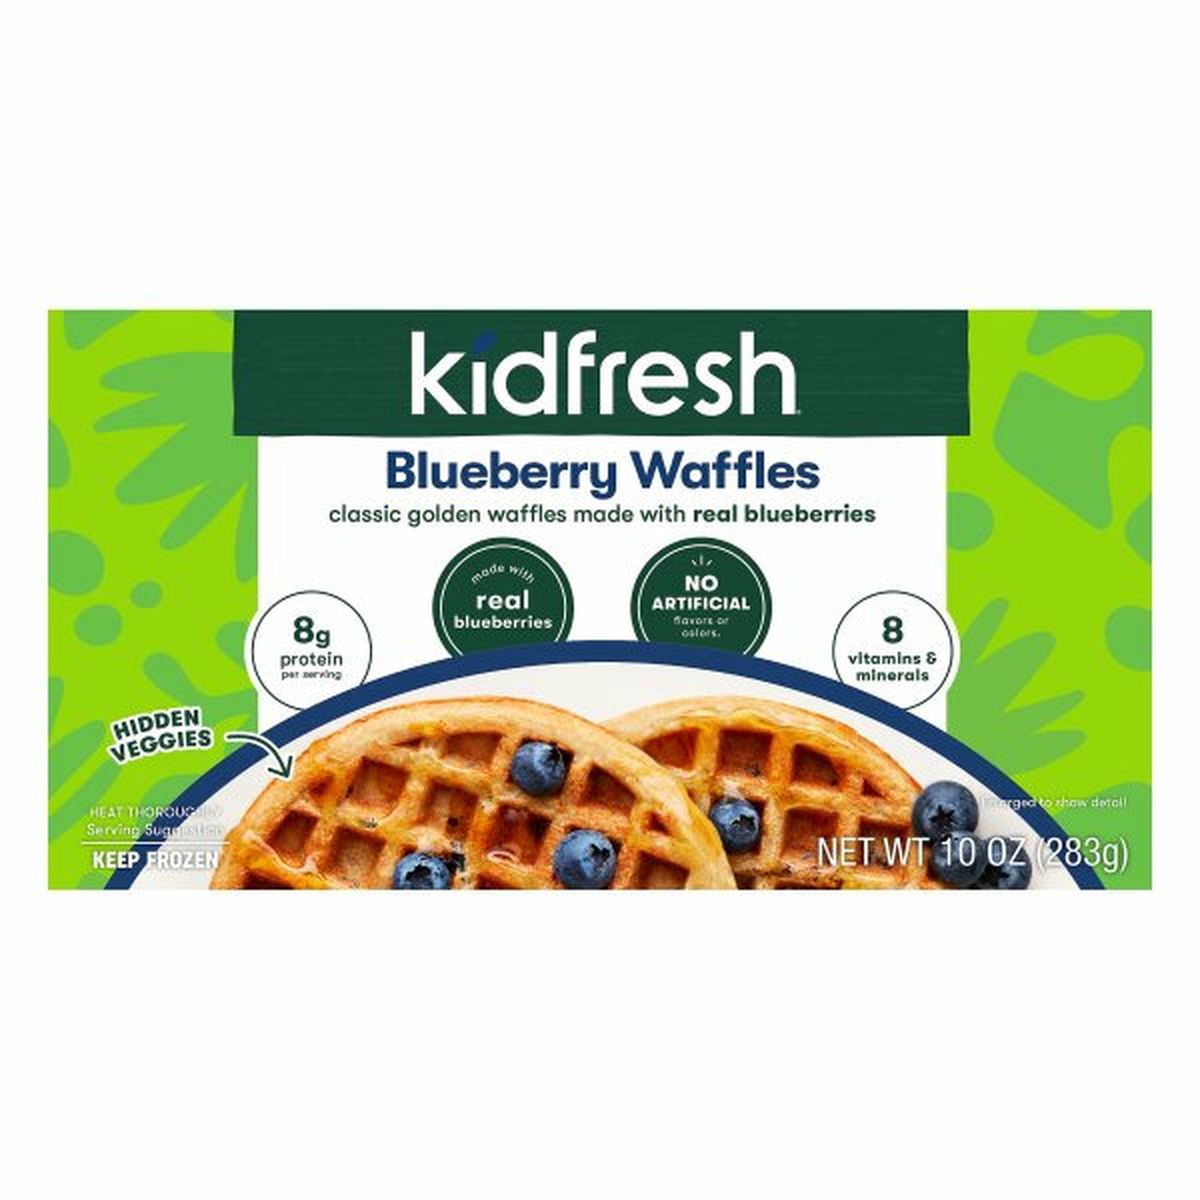 Calories in Kidfresh Waffles, Blueberry